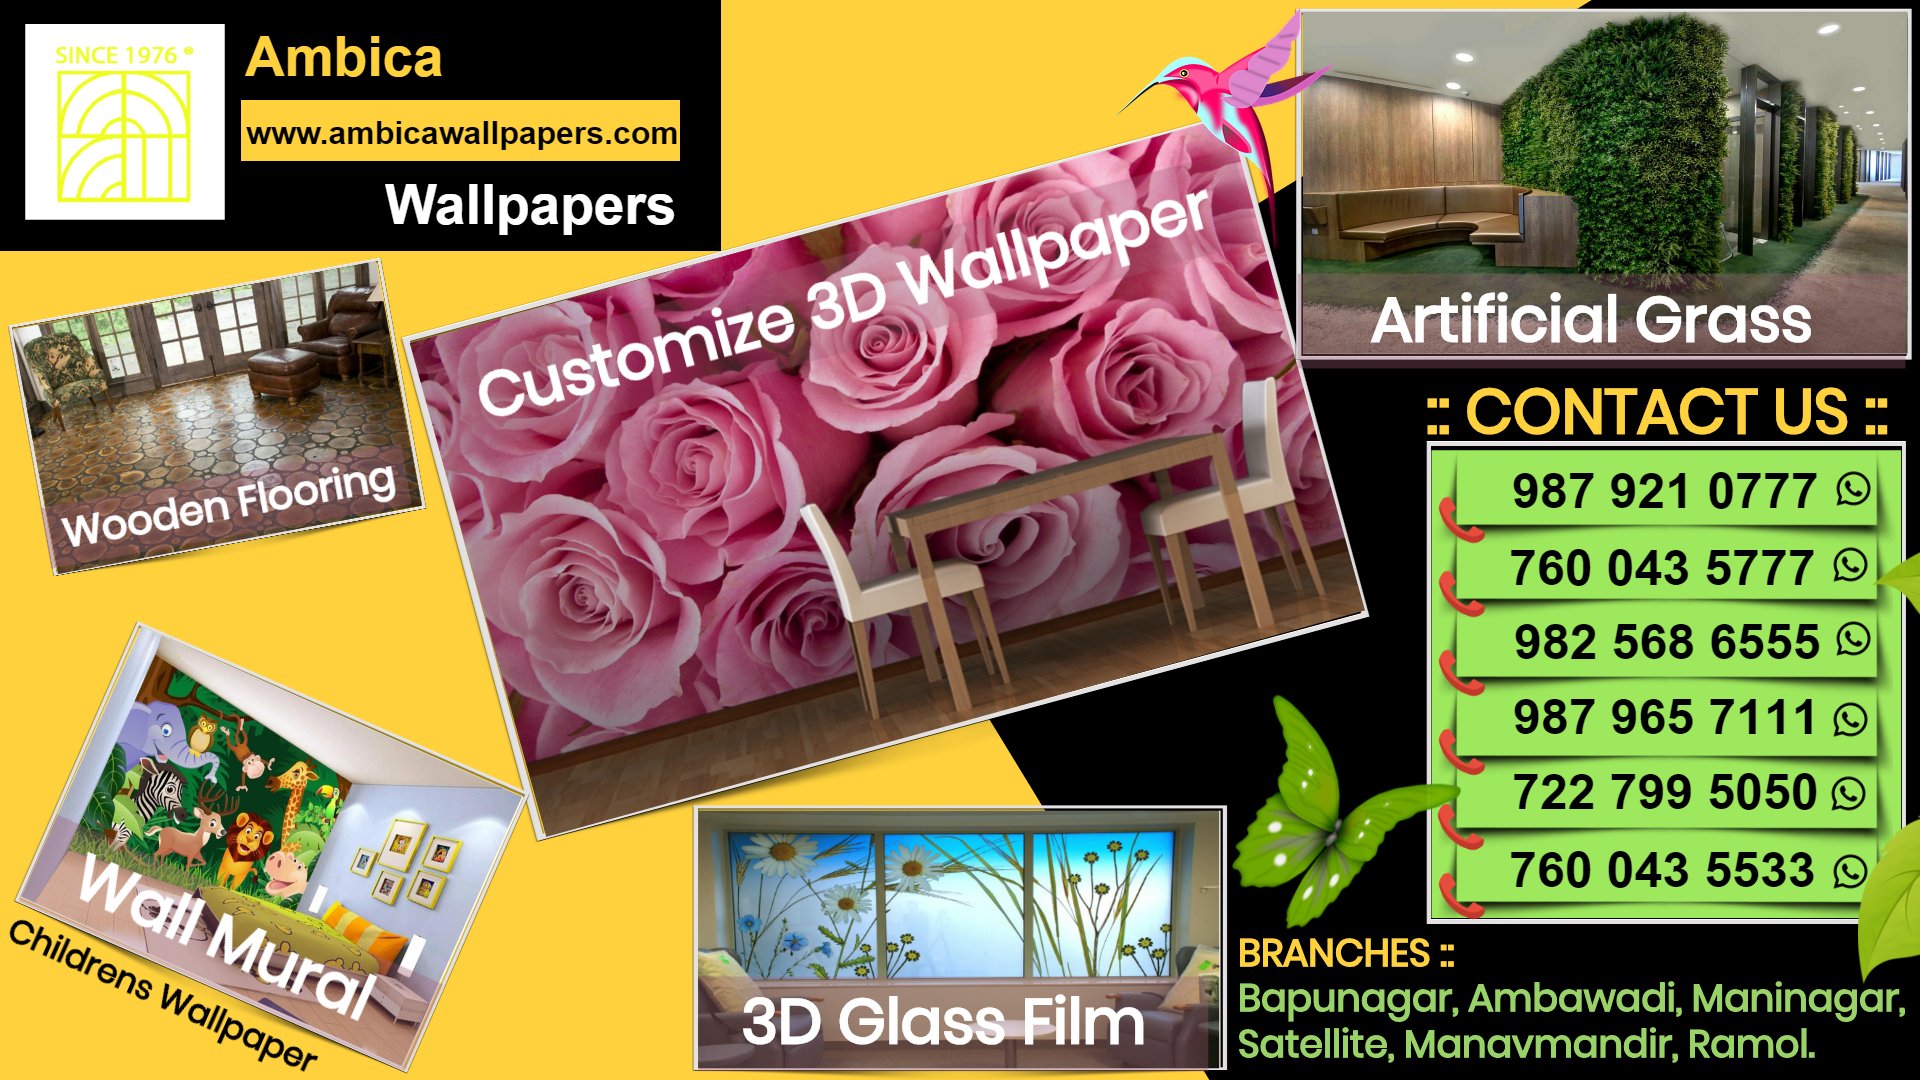 Ambica Wallpaper - Our all new nature design wallpapers for the outcome of  new season. To order just call us at 9879210777 or checkout our website at  ambicawallpapers.com. | Facebook